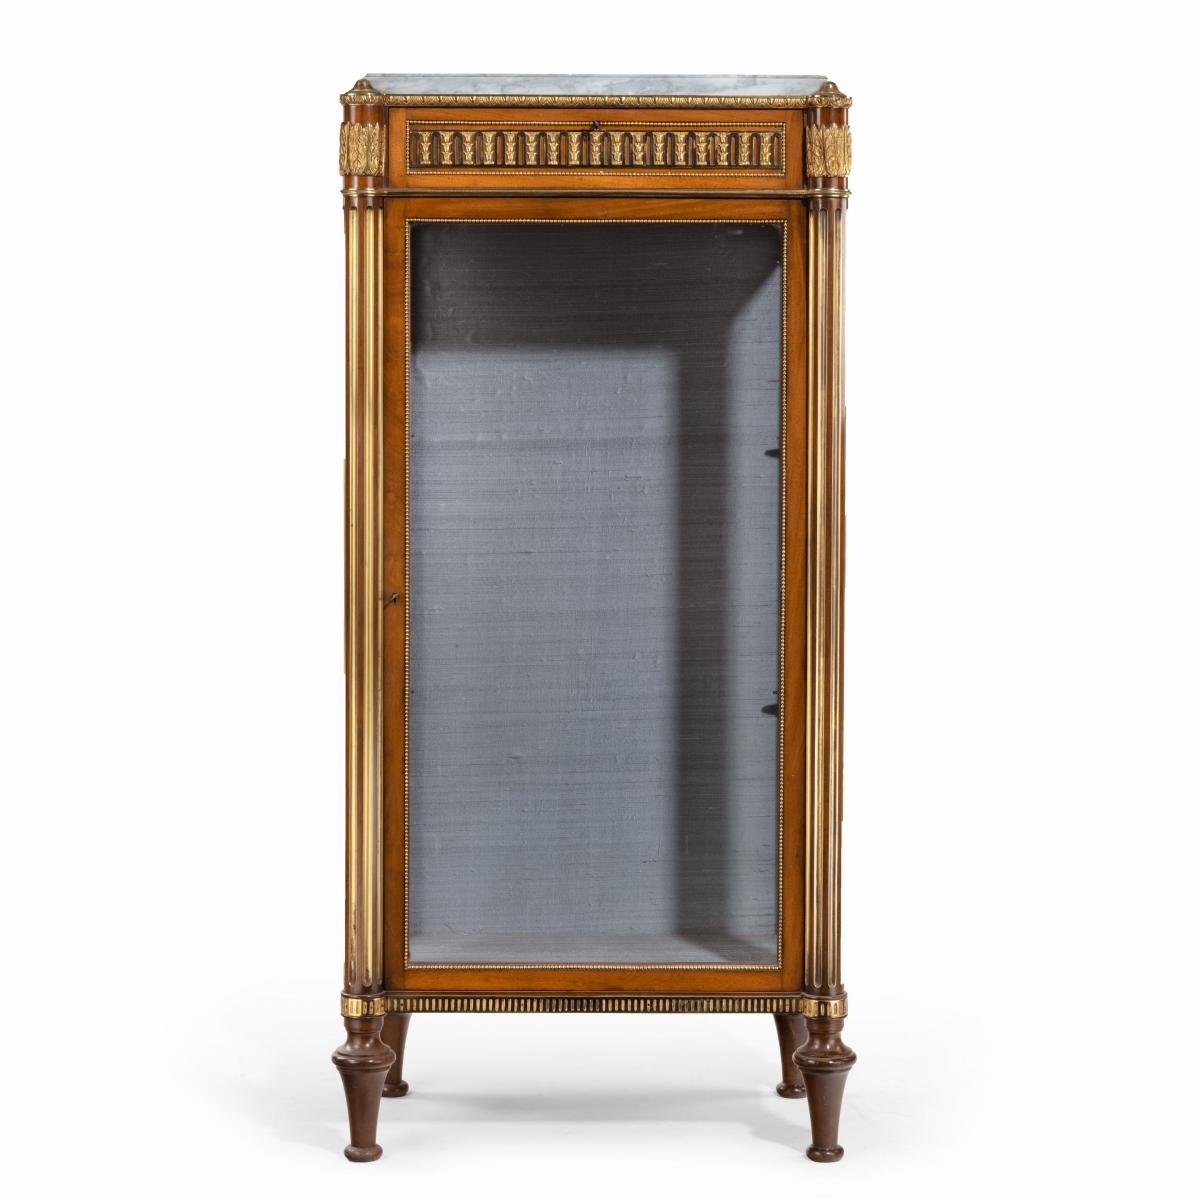 Victorian single door mahogany cabinet in the French taste